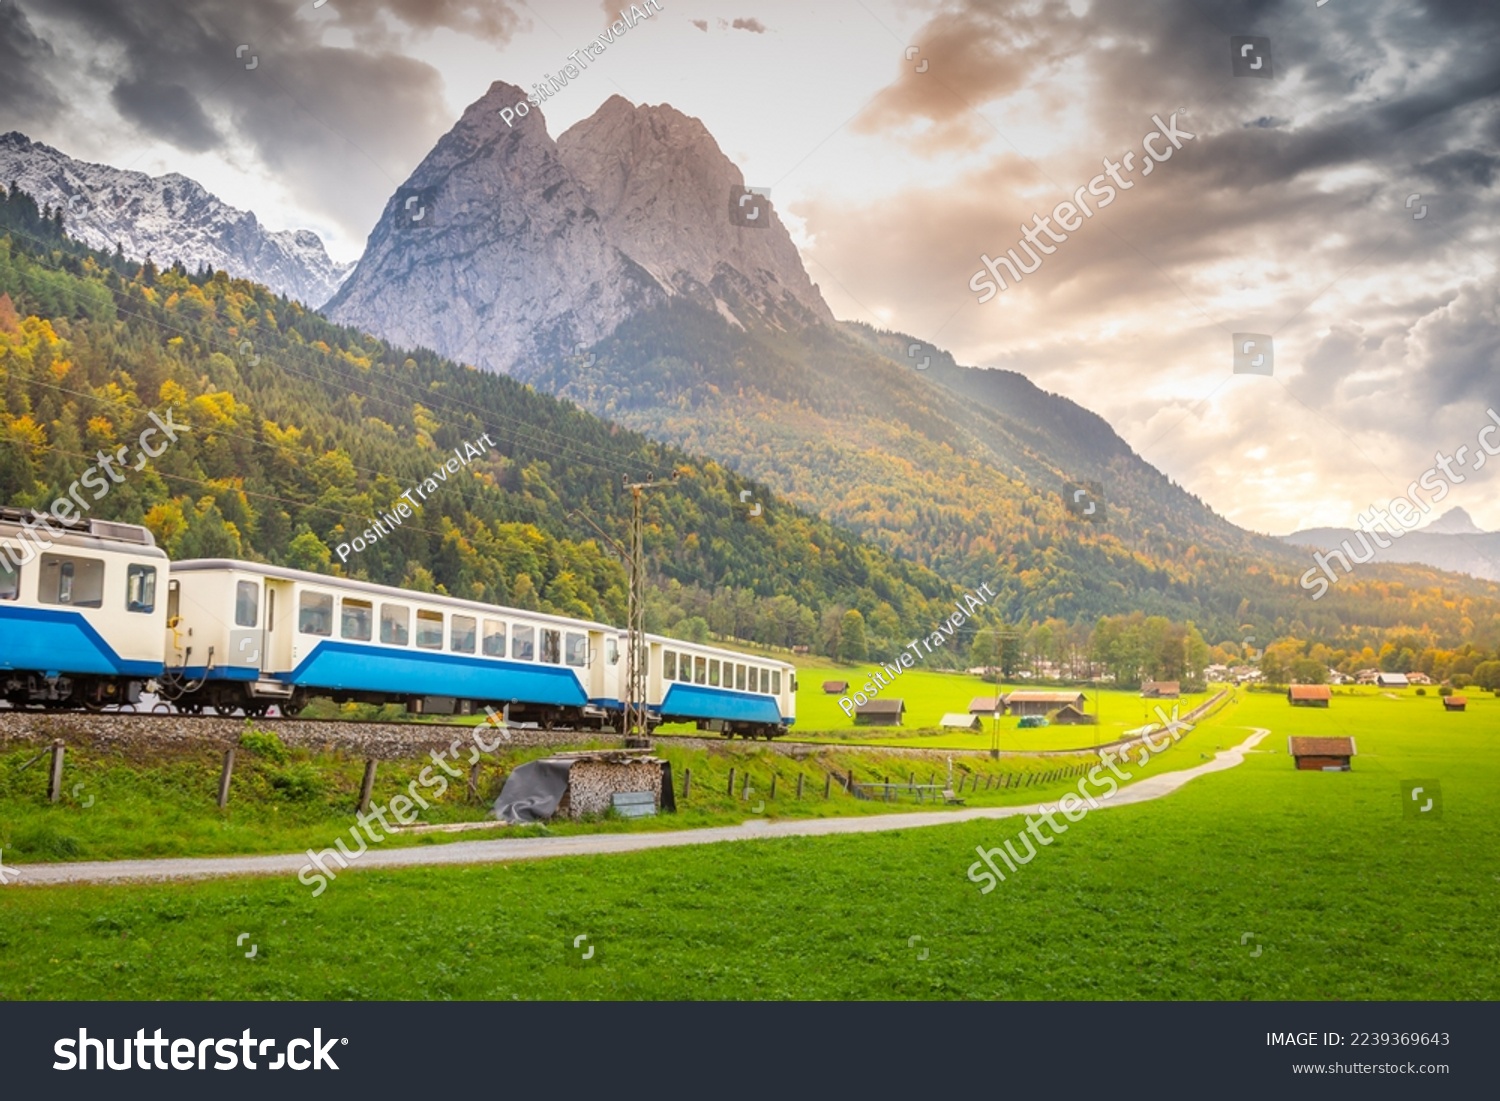 Train in Bavarian alps at autumn and wooden barns at sunset, Garmisch, Germany #2239369643